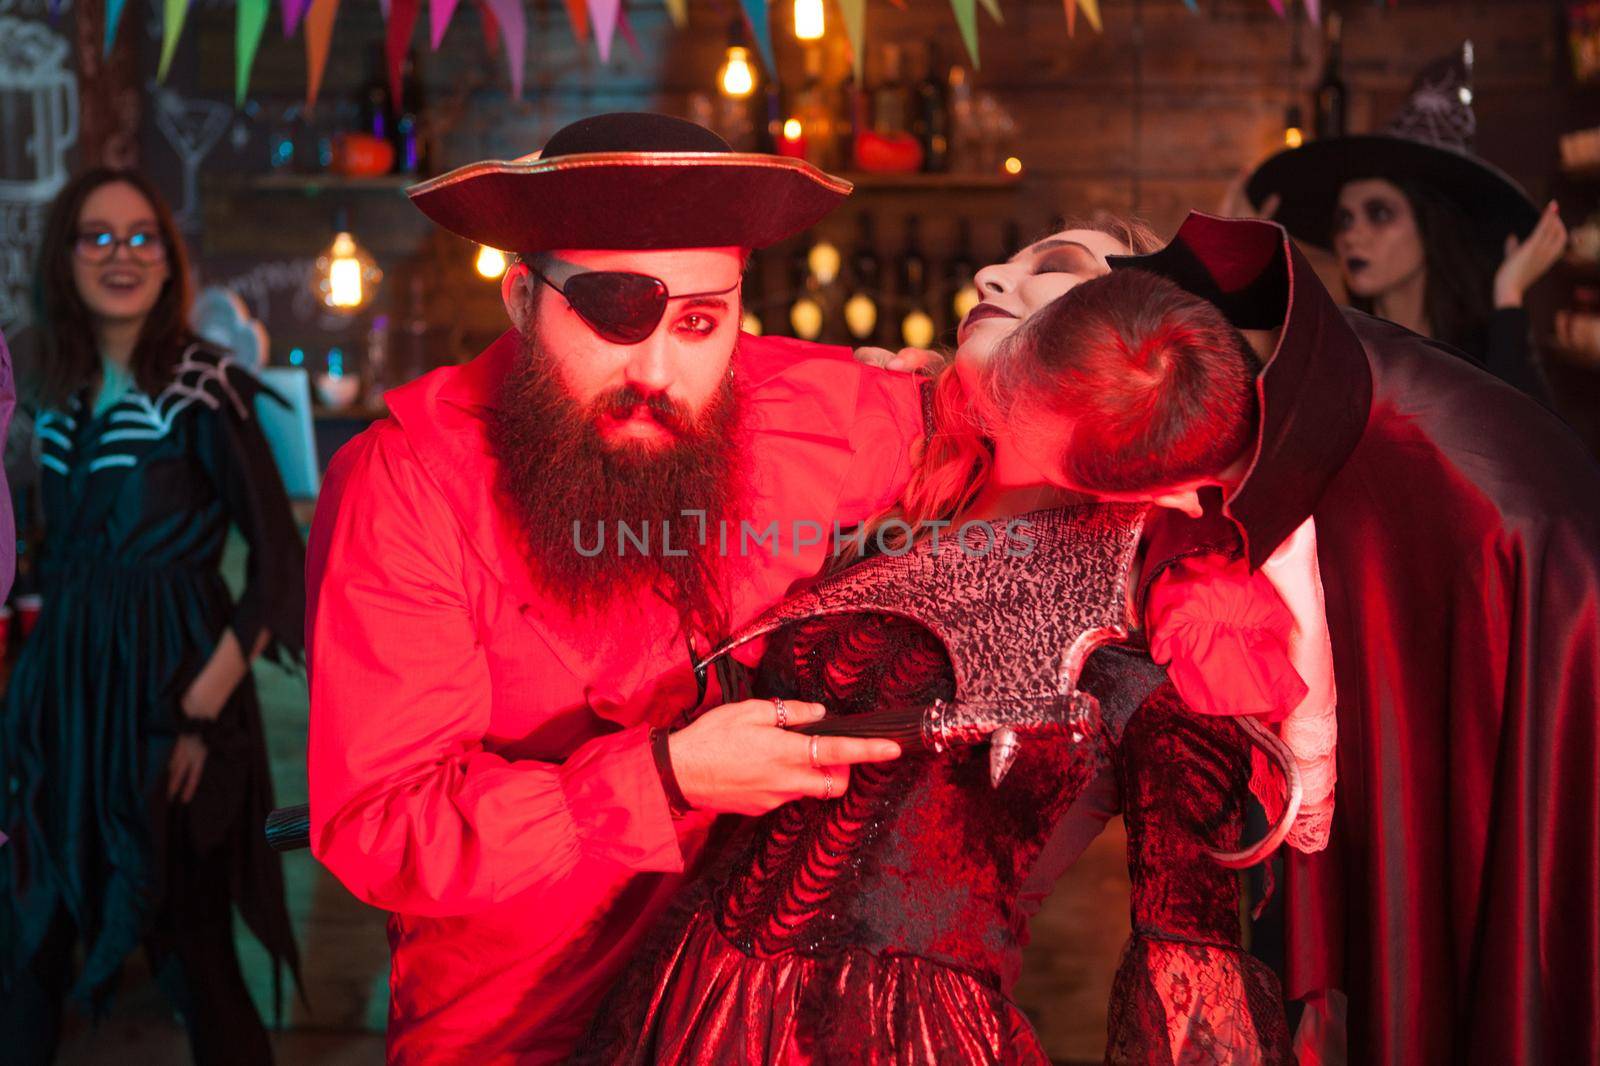 Man in dracula costume biting woman's neck dressed up like a witch for halloween by DCStudio